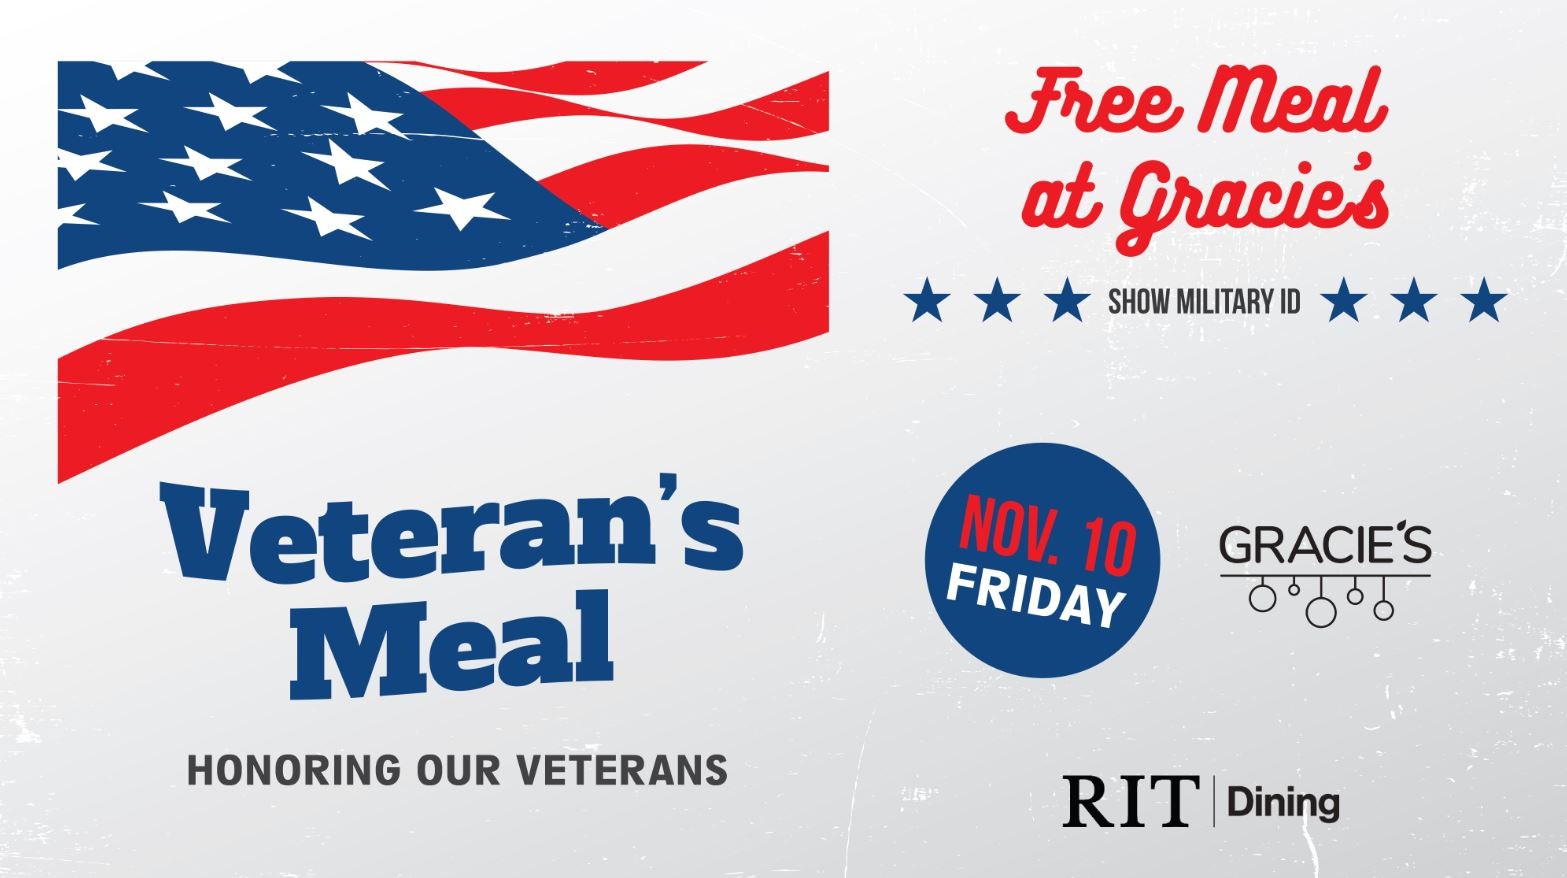 Free meal at Gracie's for Veteran's Day